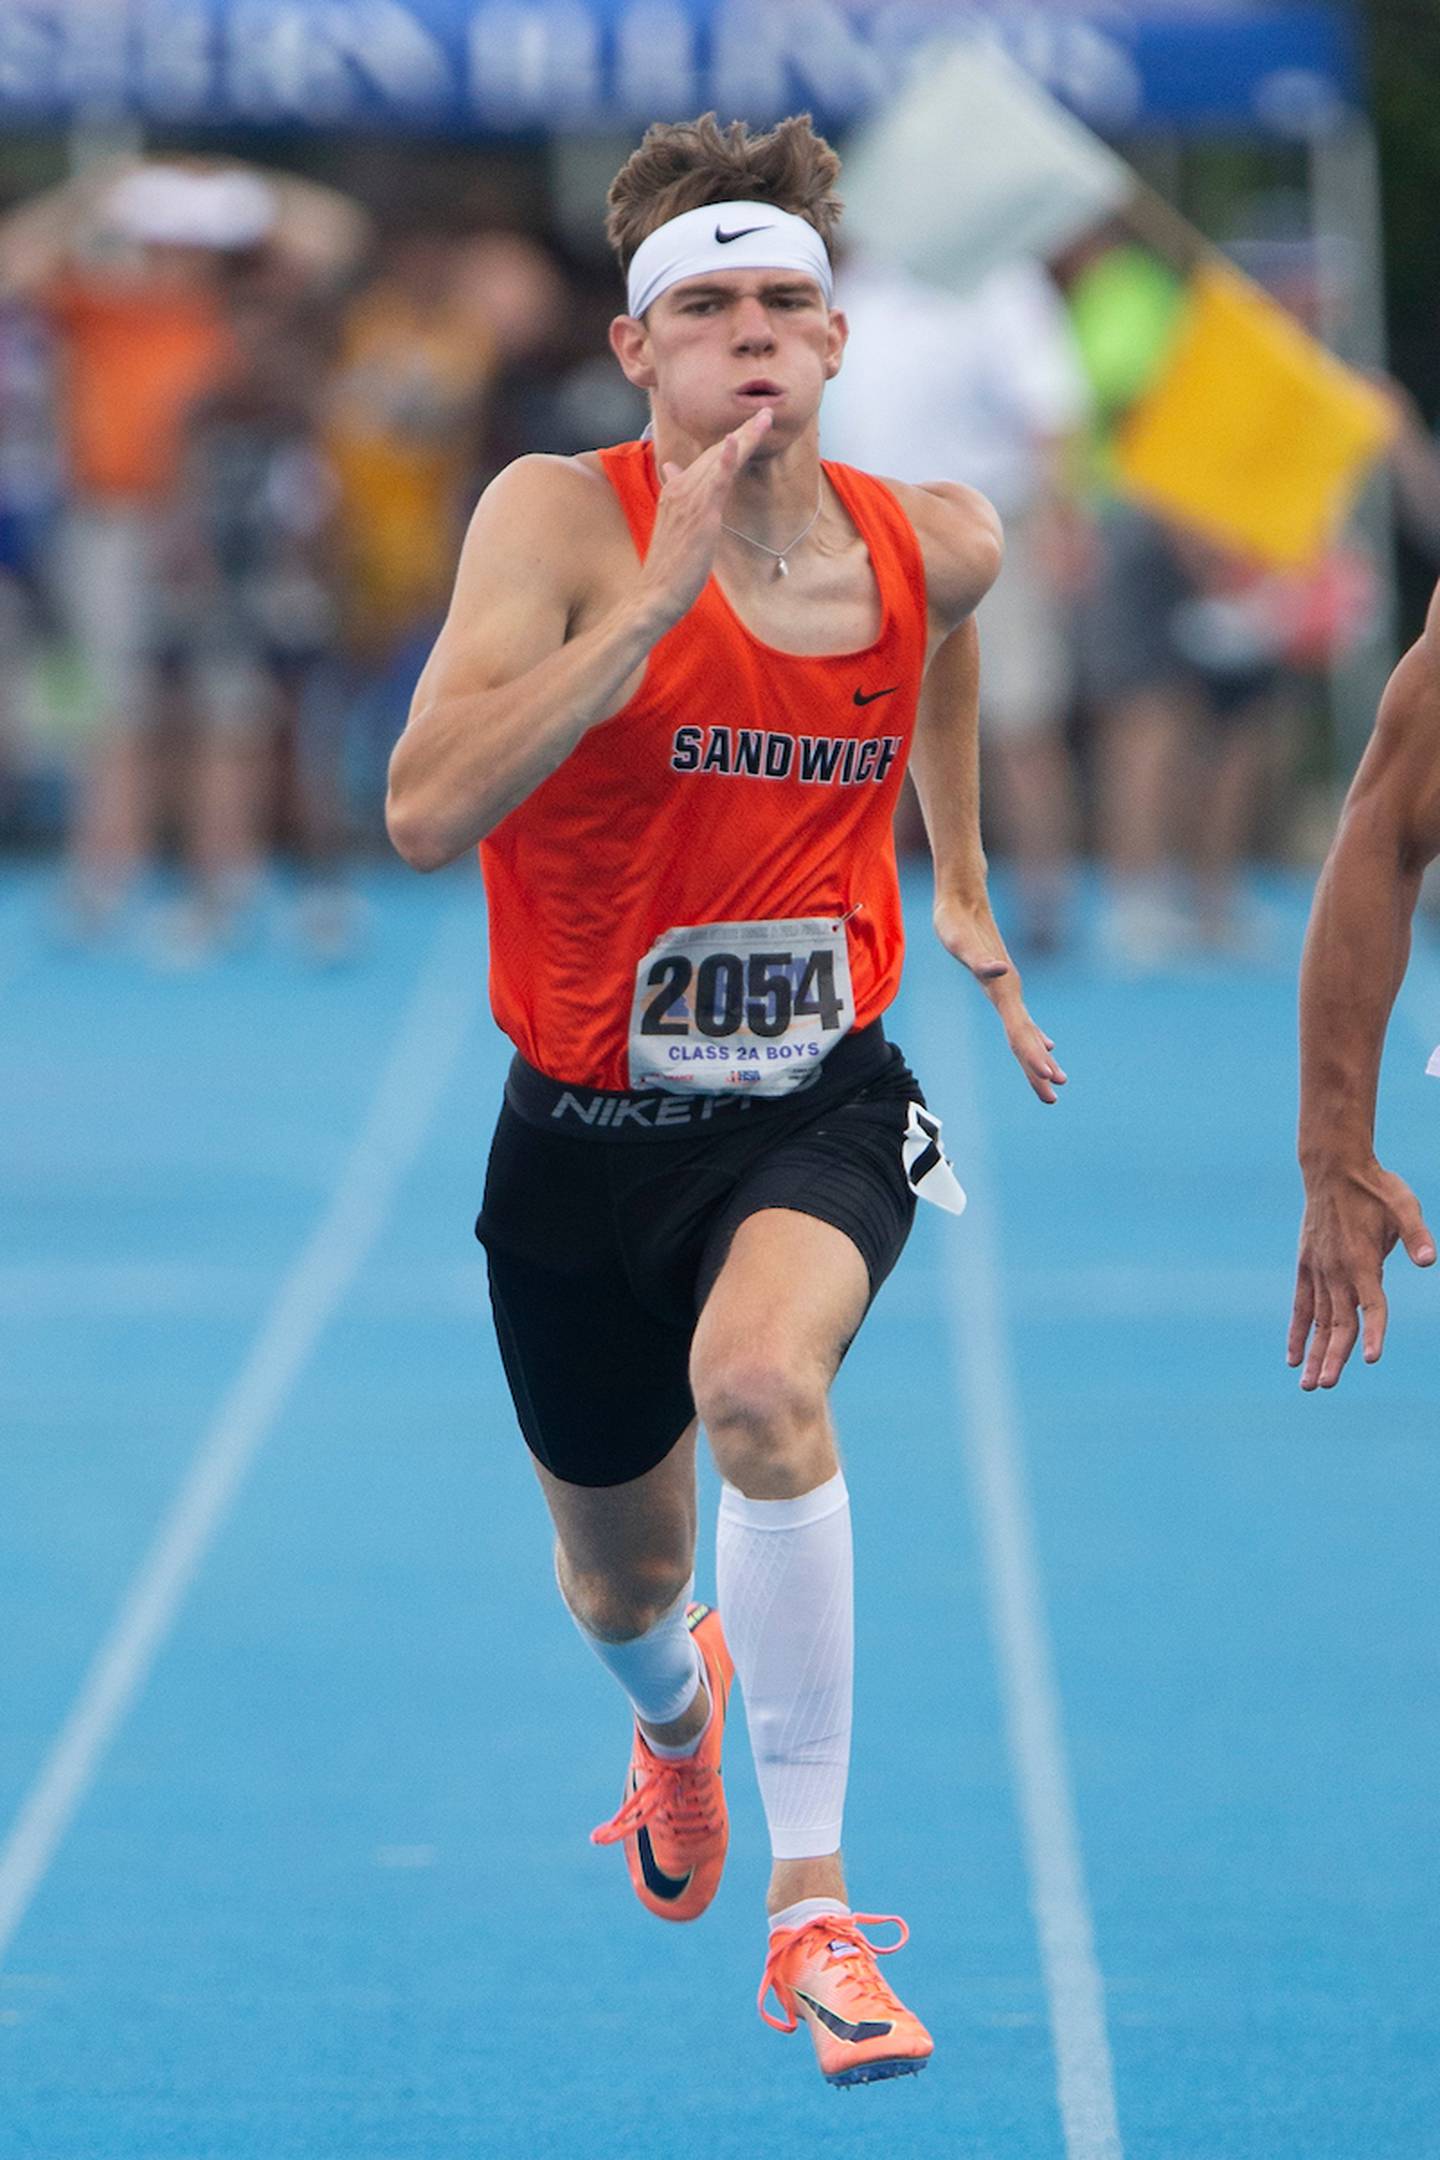 June 18, 2021- Charleston, IL -Sandwich's Michael Marrs competes in the Class 2A 100-Meter Dash during IHSA Boys State Track and Field Finals. [Photo: Douglas Cottle/PhotoNews]